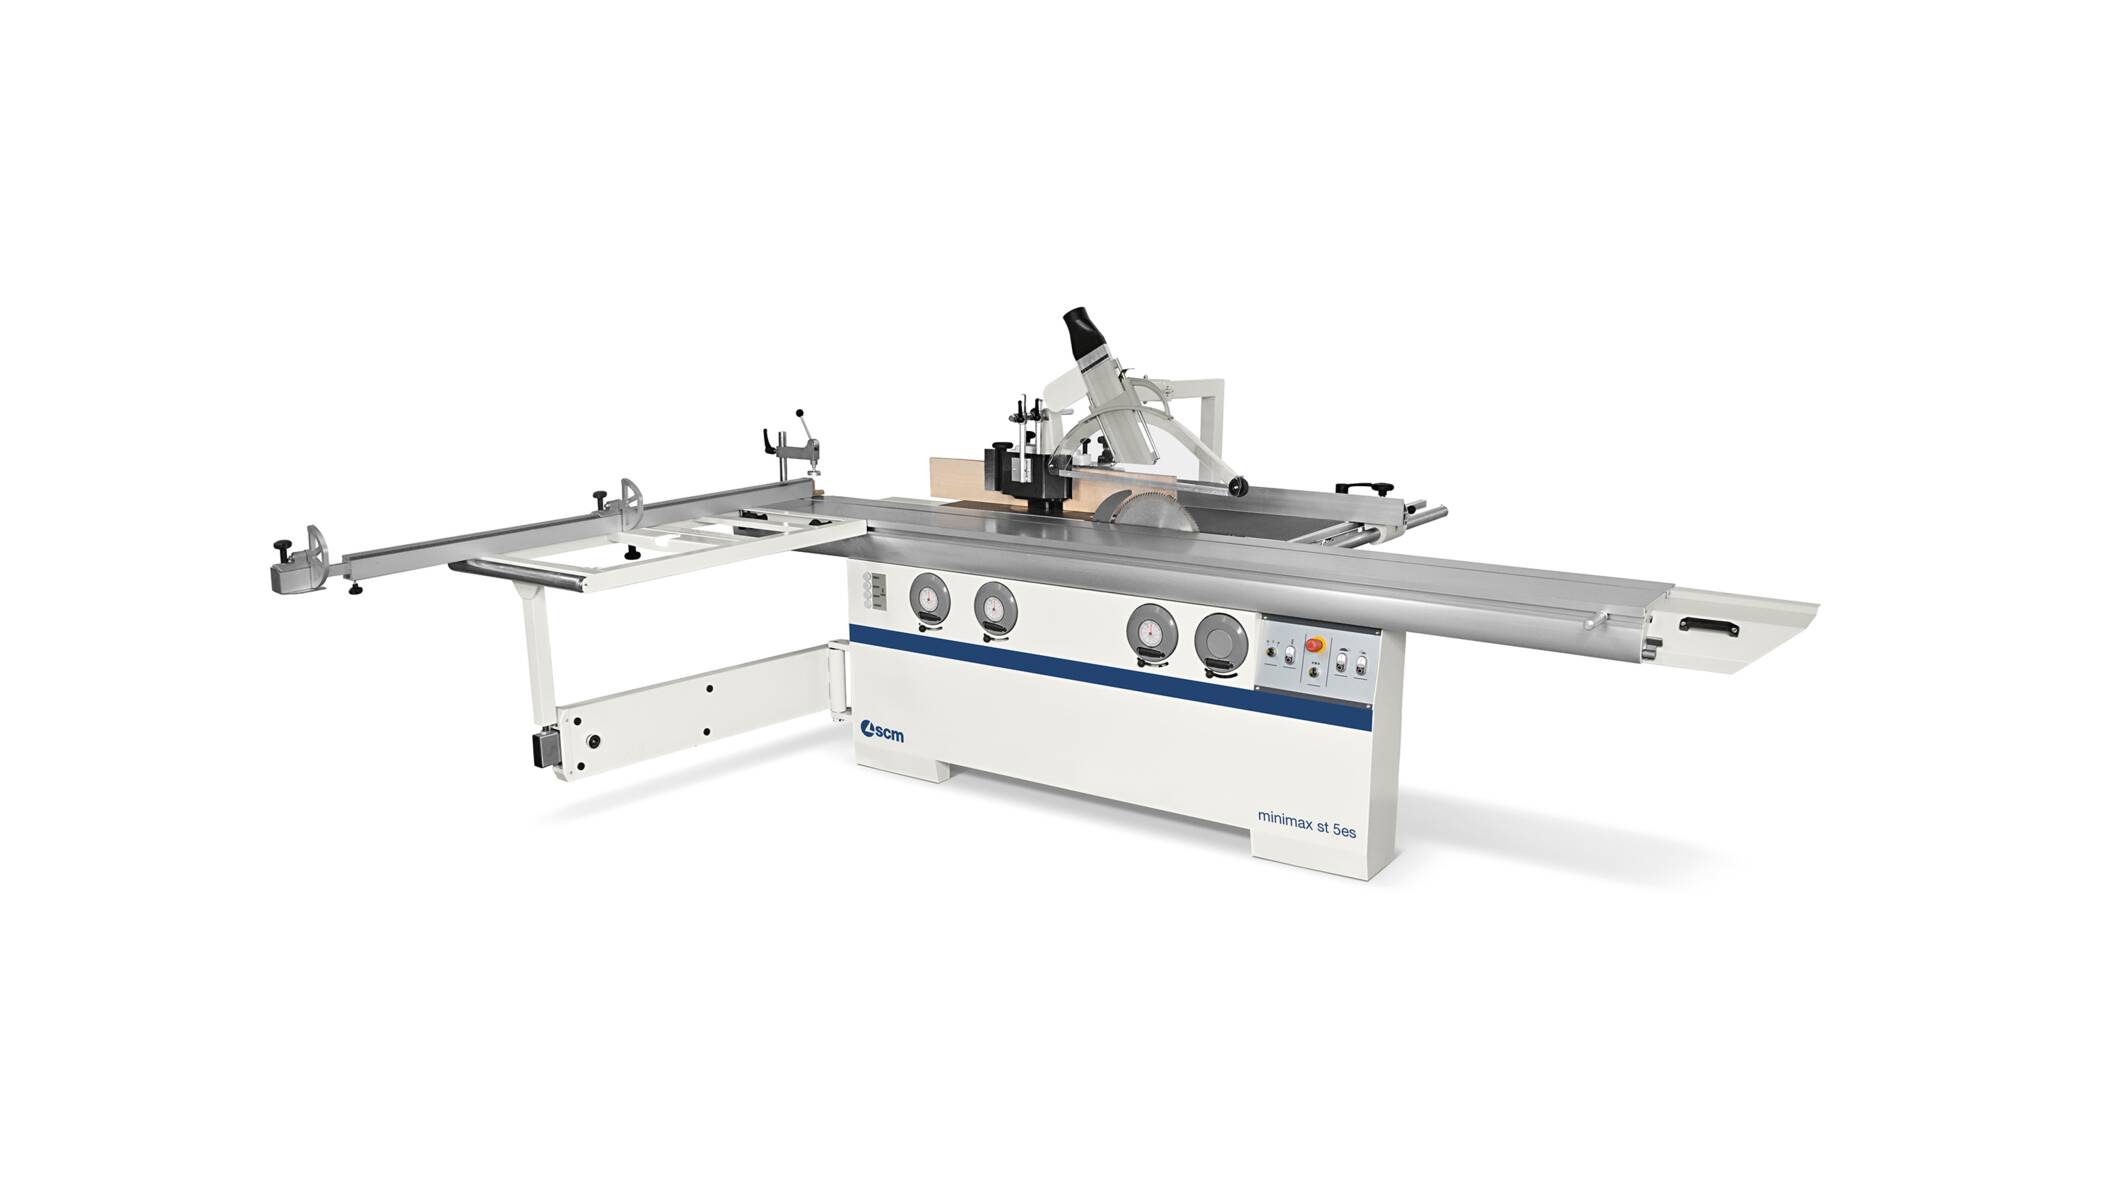 Joinery machines - Saw / shaper combination machines - minimax st 5es